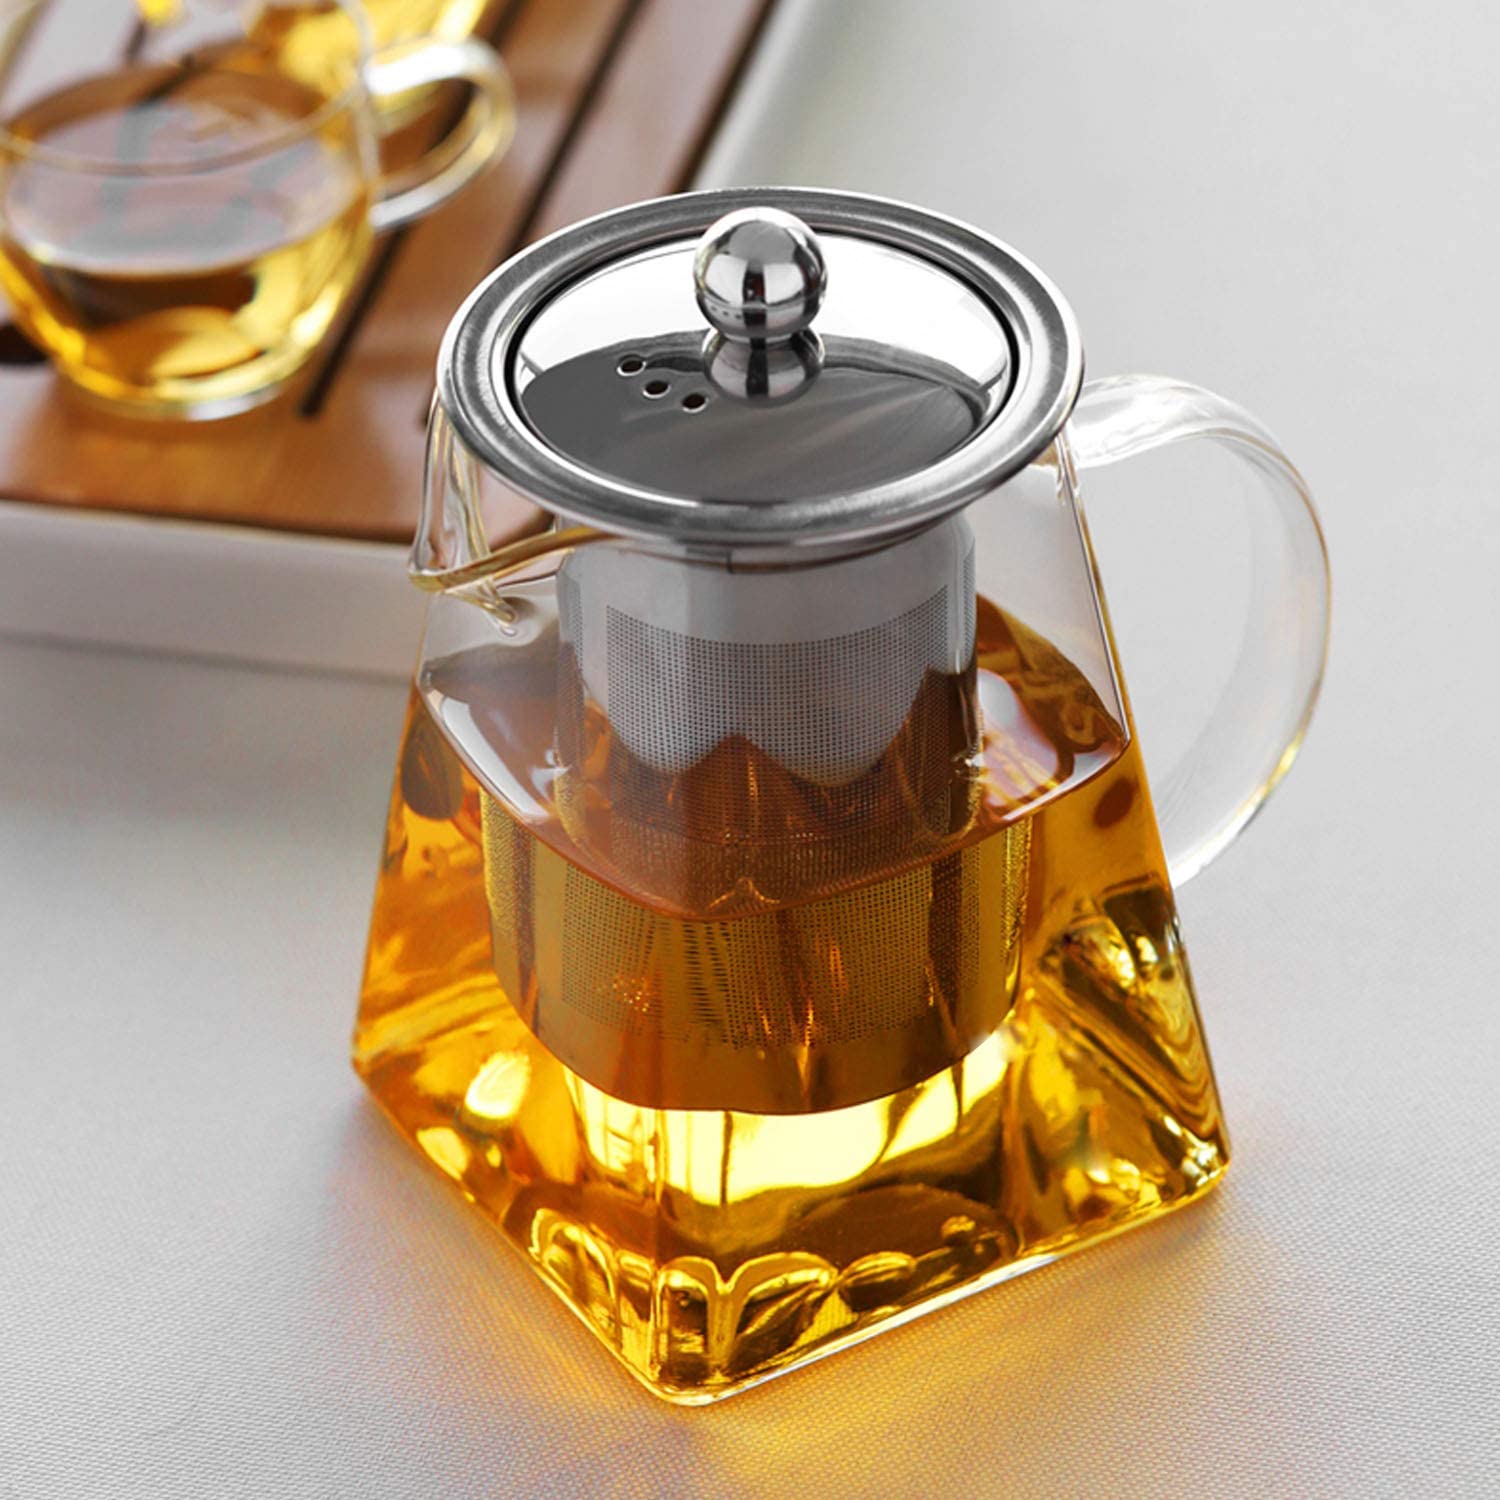 Wisolt Glass Teapots with Removable Infuser, Tall Borosilicate Glass Teapot for Loose Leaves, Square Shape, Stainless Steel Sieve & Stainless Steel Lid, transparent, 350ml